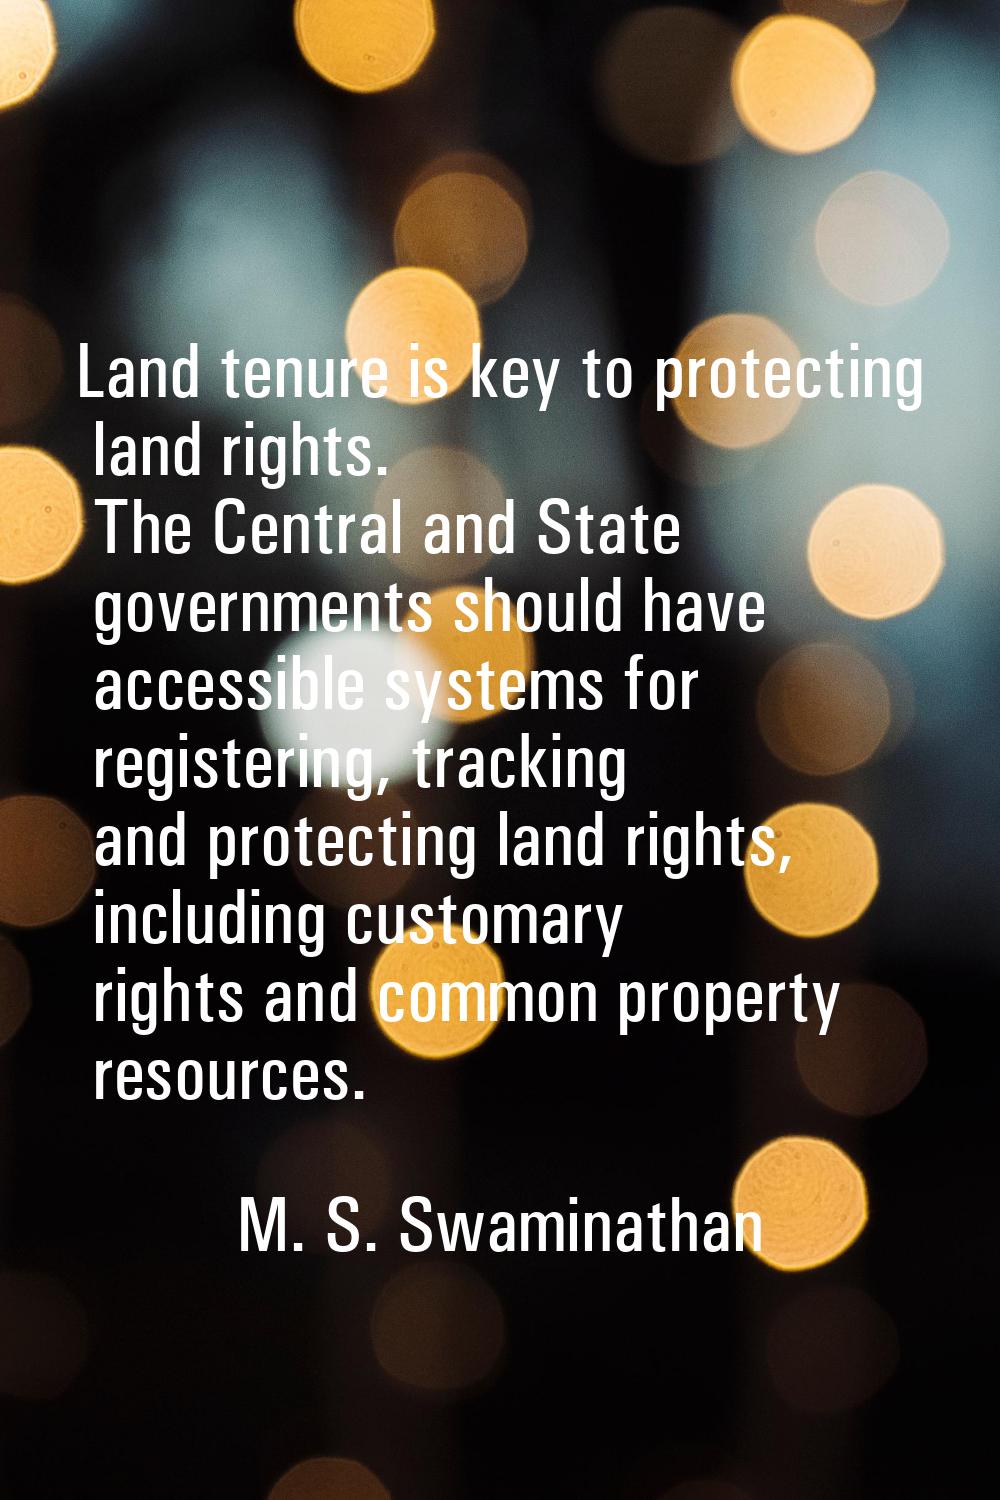 Land tenure is key to protecting land rights. The Central and State governments should have accessi